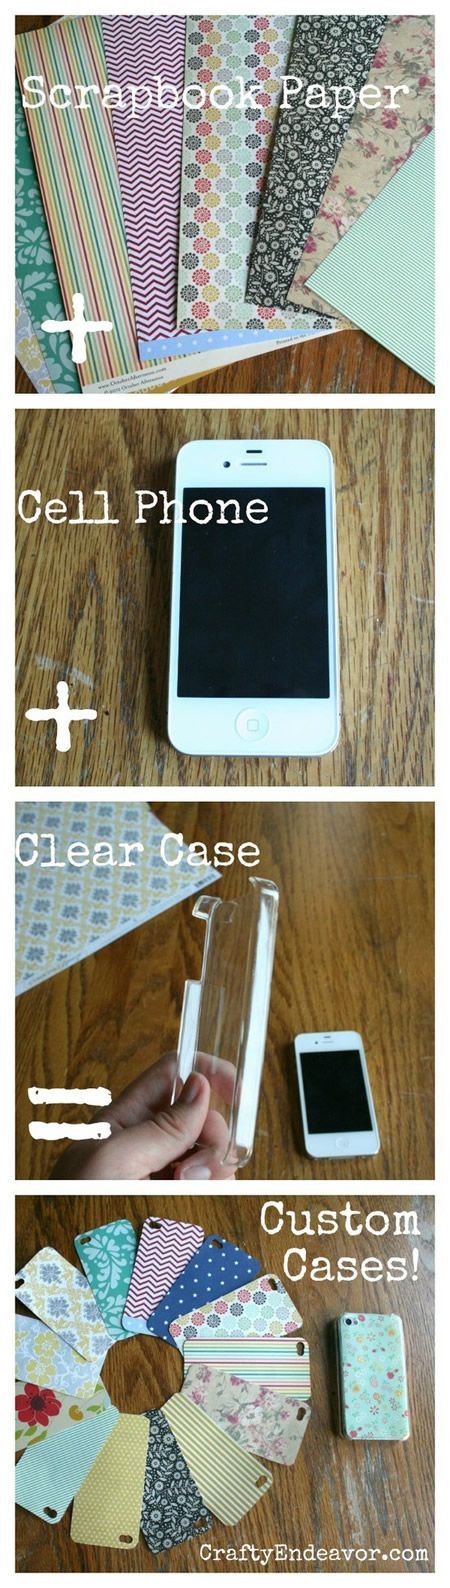 This is fun and an easy, inexpensive cute cover. Wait! I have a clear case now!